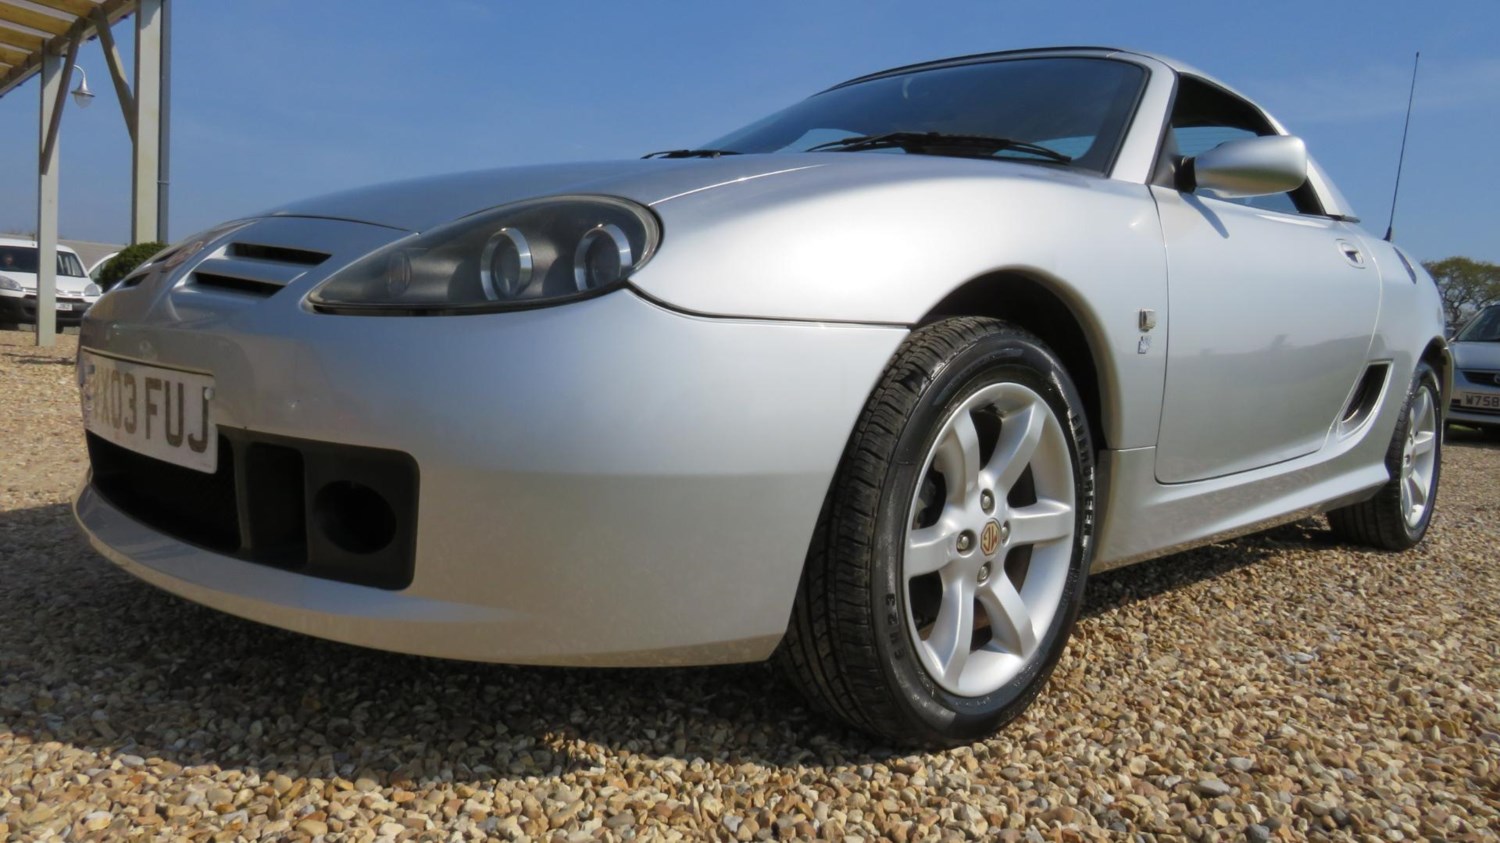 2003 (03) MG MGTF 1.8 135 16V 2 DOOR GENUINE LOW MILEAGE For Sale In Lymington, Hampshire